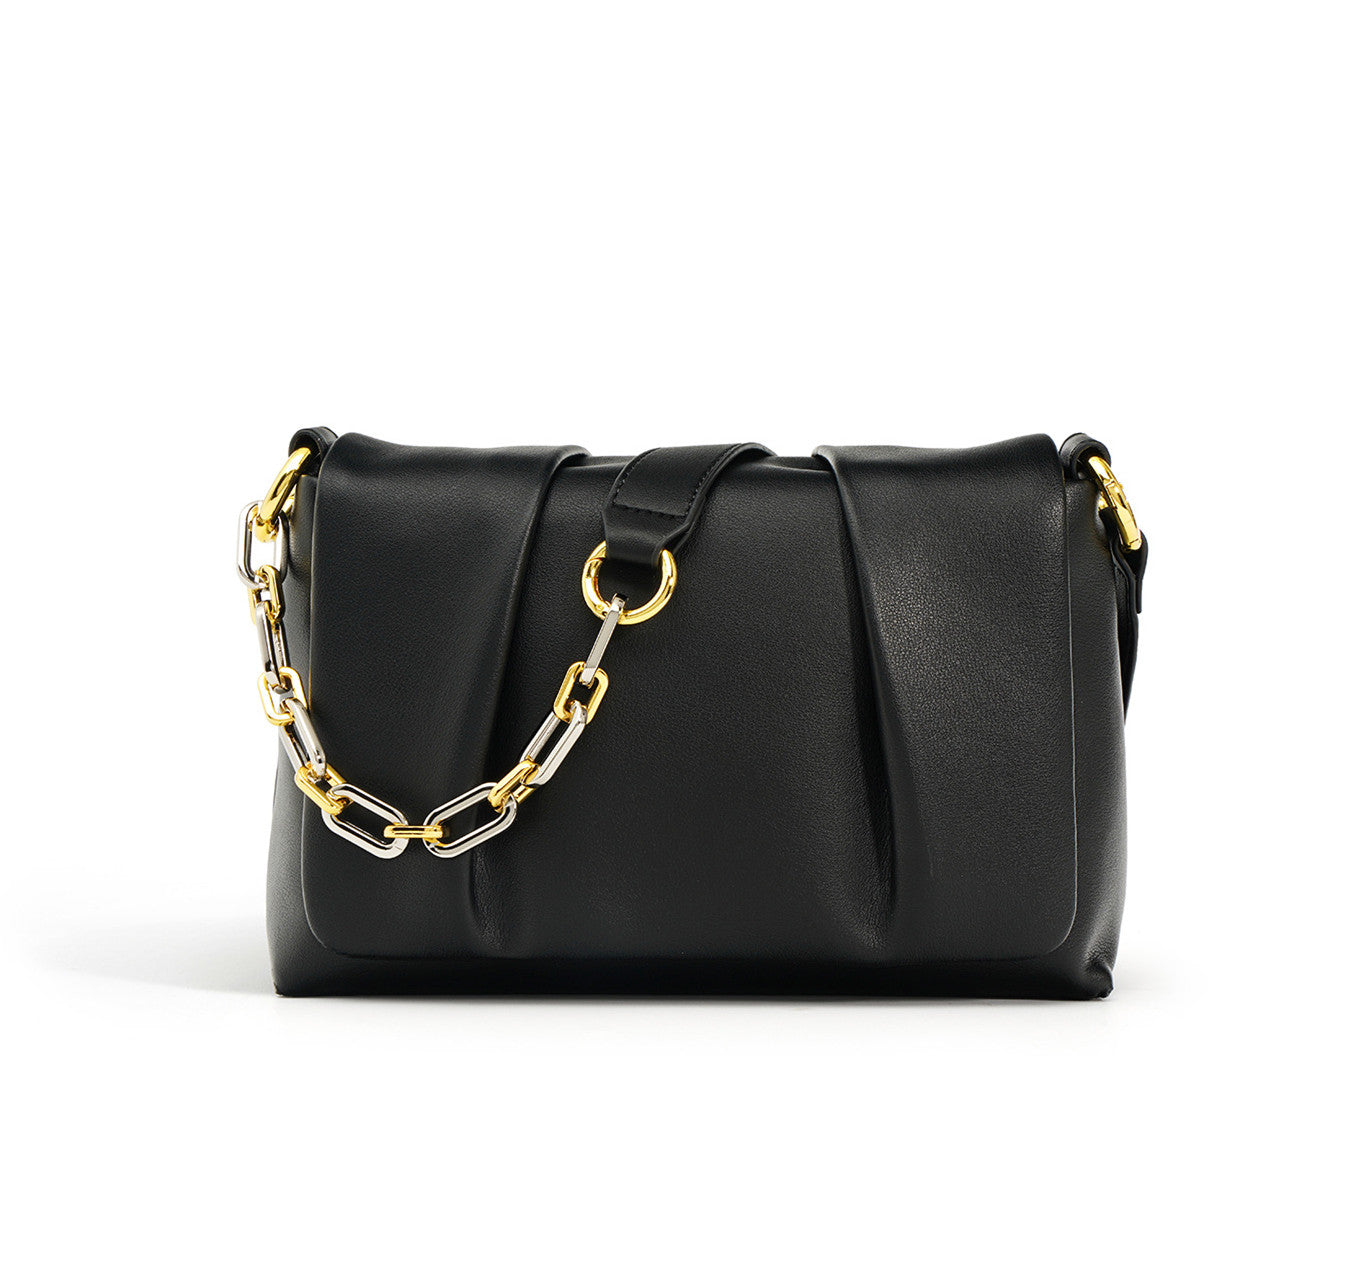 Ladies Square Leather Bag with Chain Strap for Fashionable Outfits